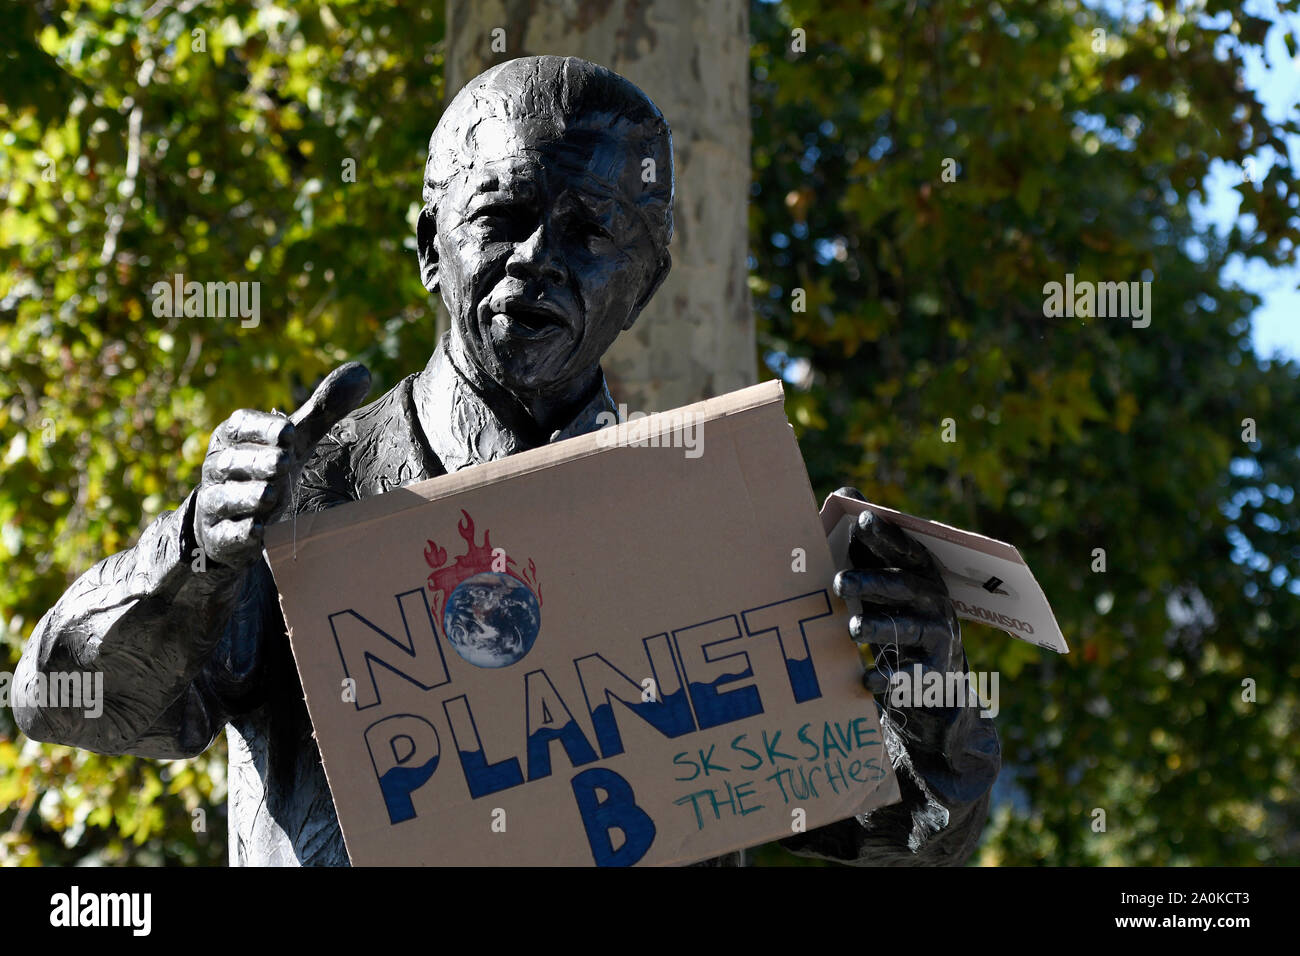 A placard that says no planet b hangs on the Mandela's sculpture during the protest in London.Adult and youth walking out of work and schools to demand for an end to the use of fossil fuels and demanding urgent action on climate change to save the planet. Stock Photo